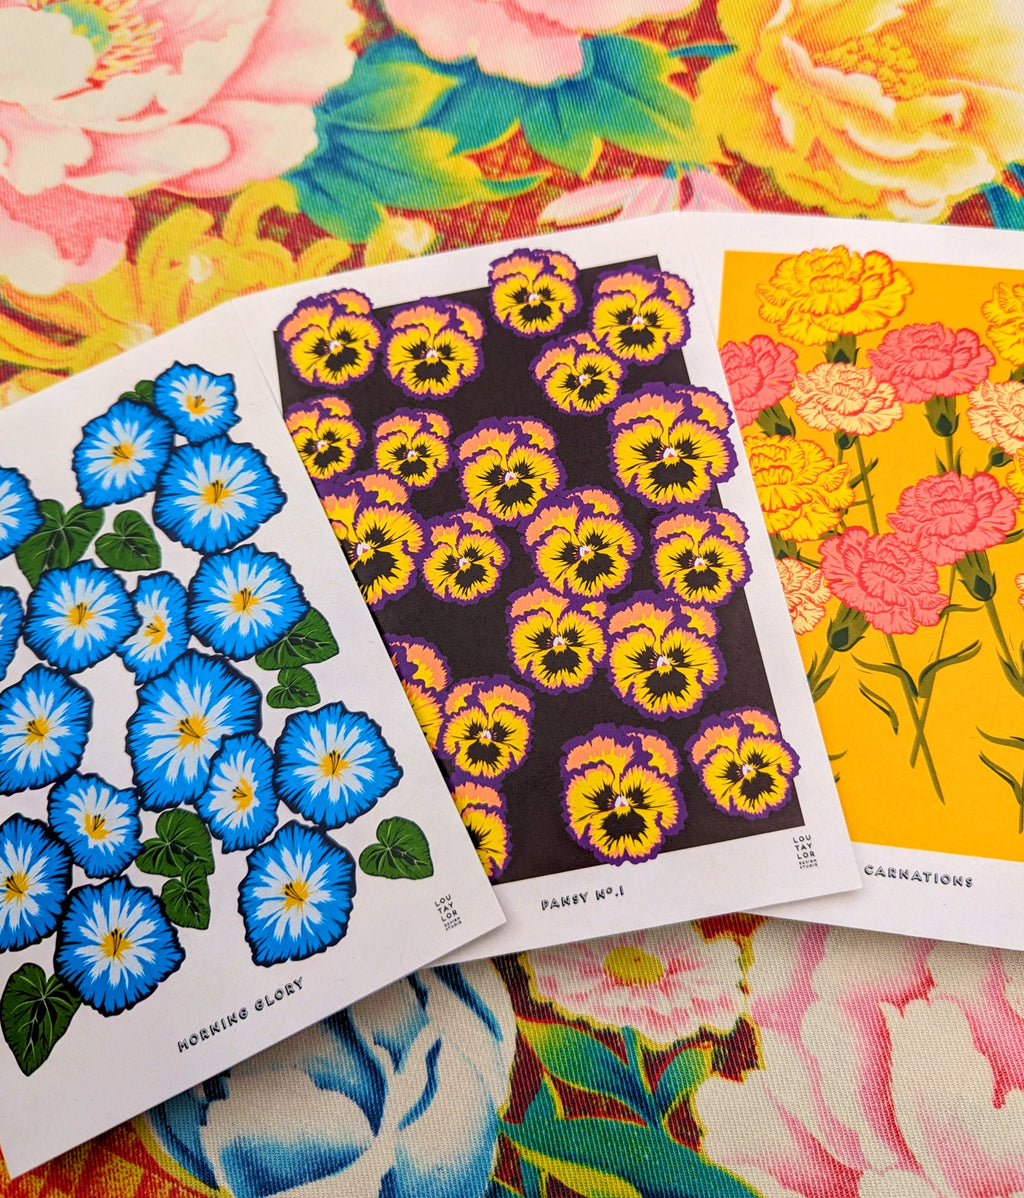 Seed packet inspired florals by Lou